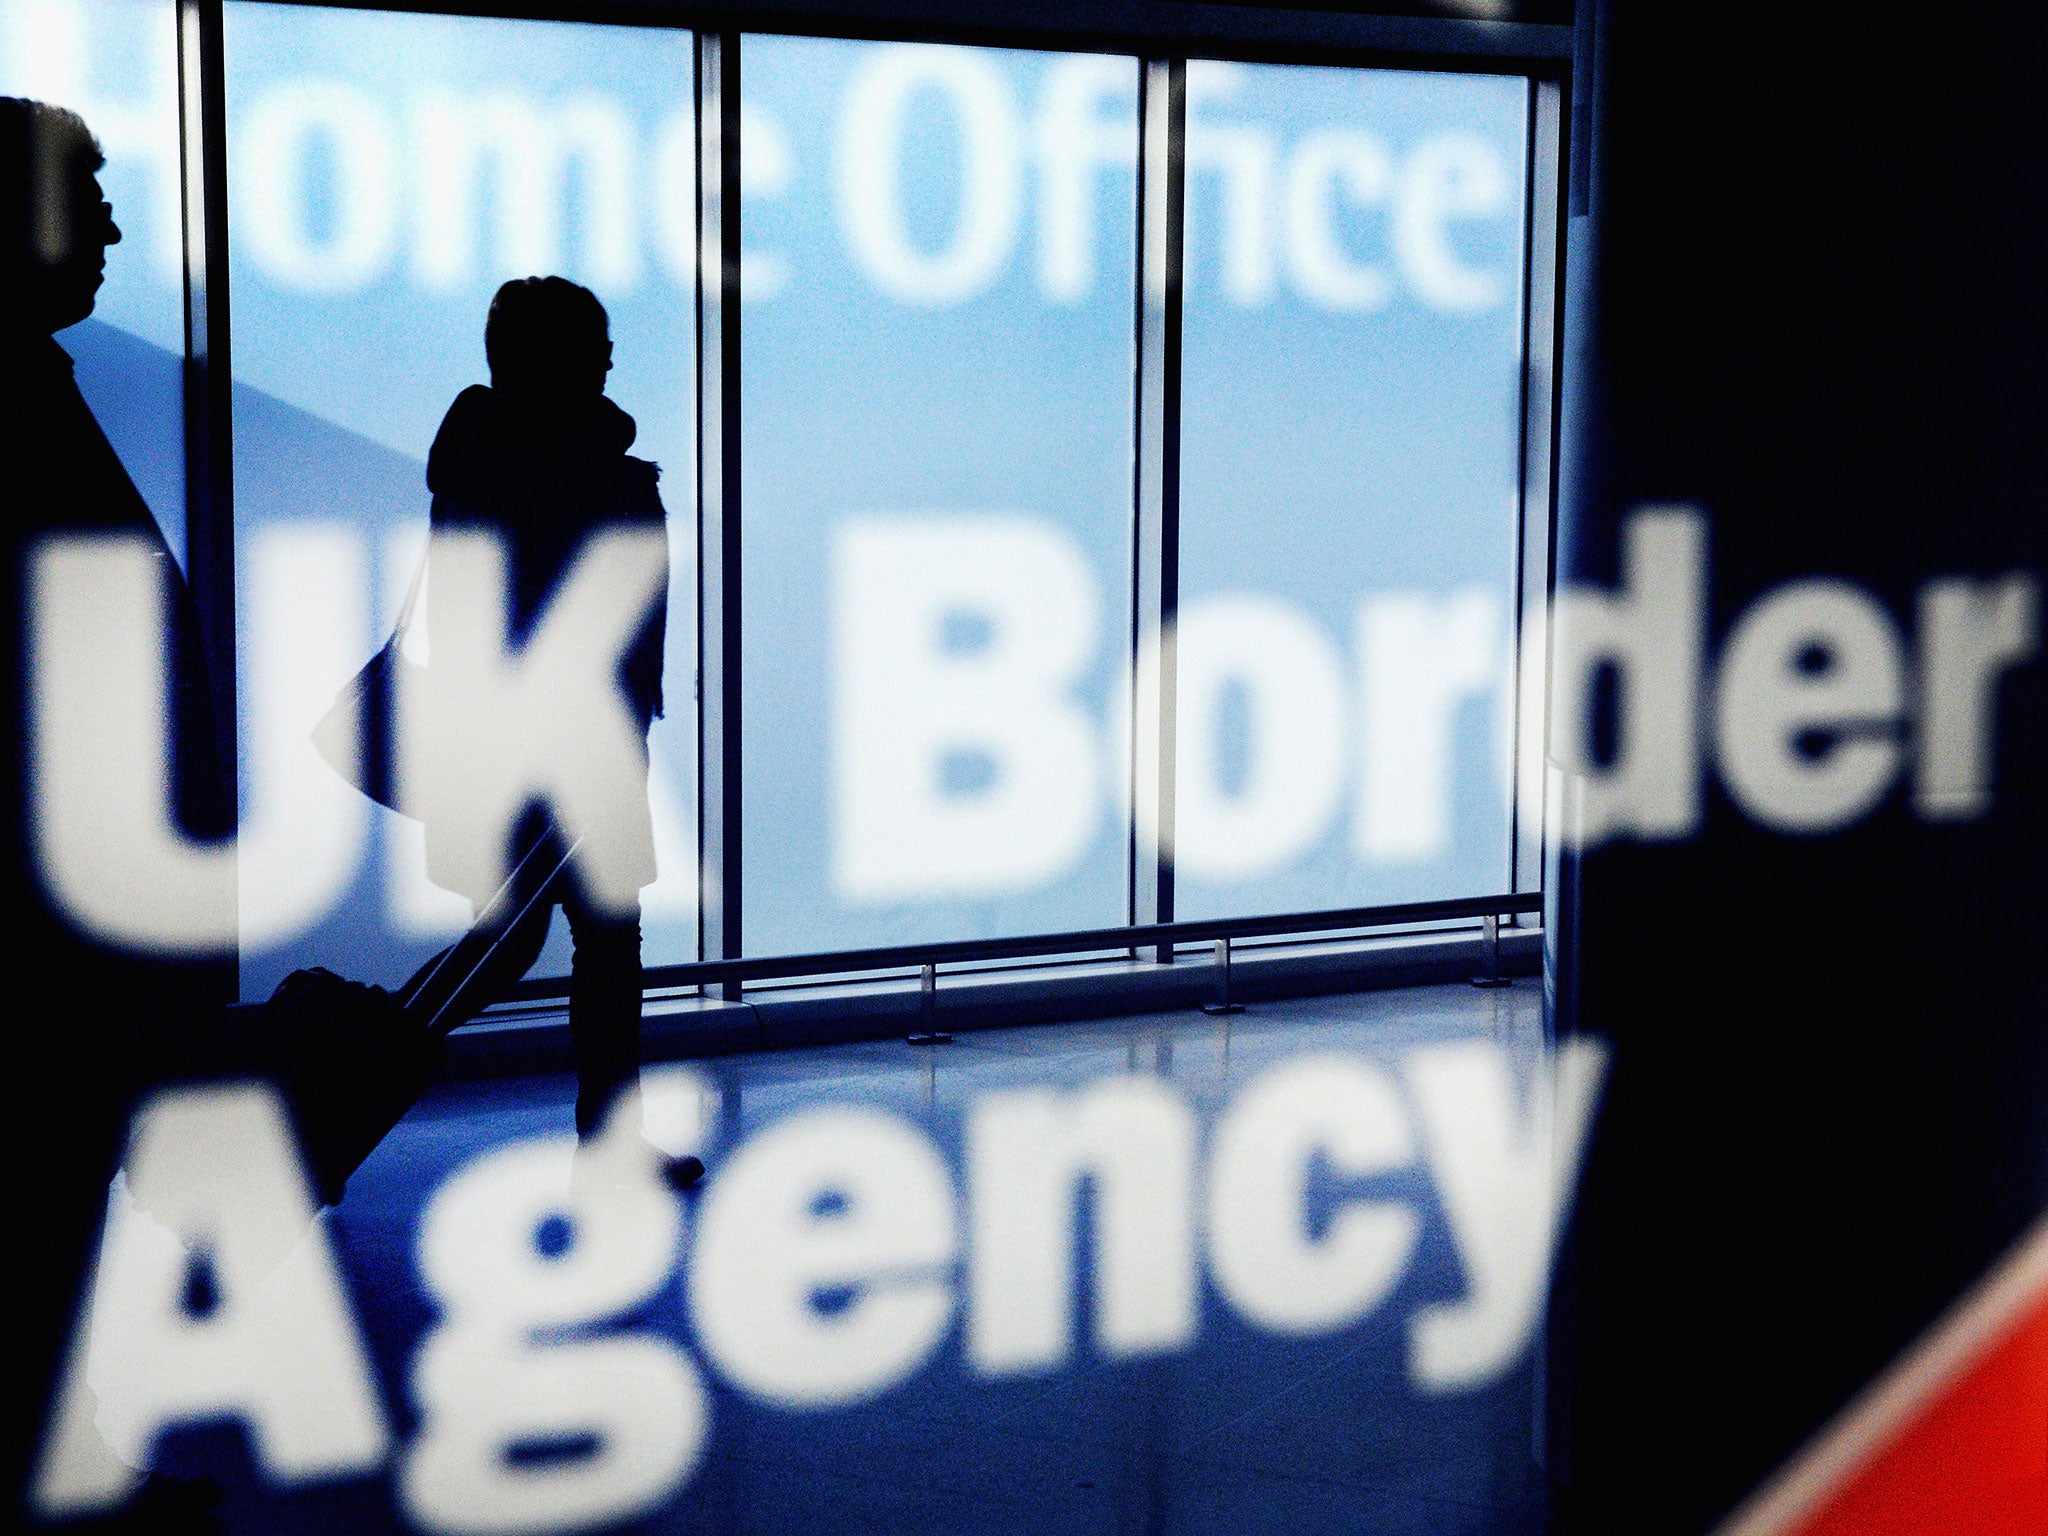 A recent rise in net migration has been considered bad news for the Government